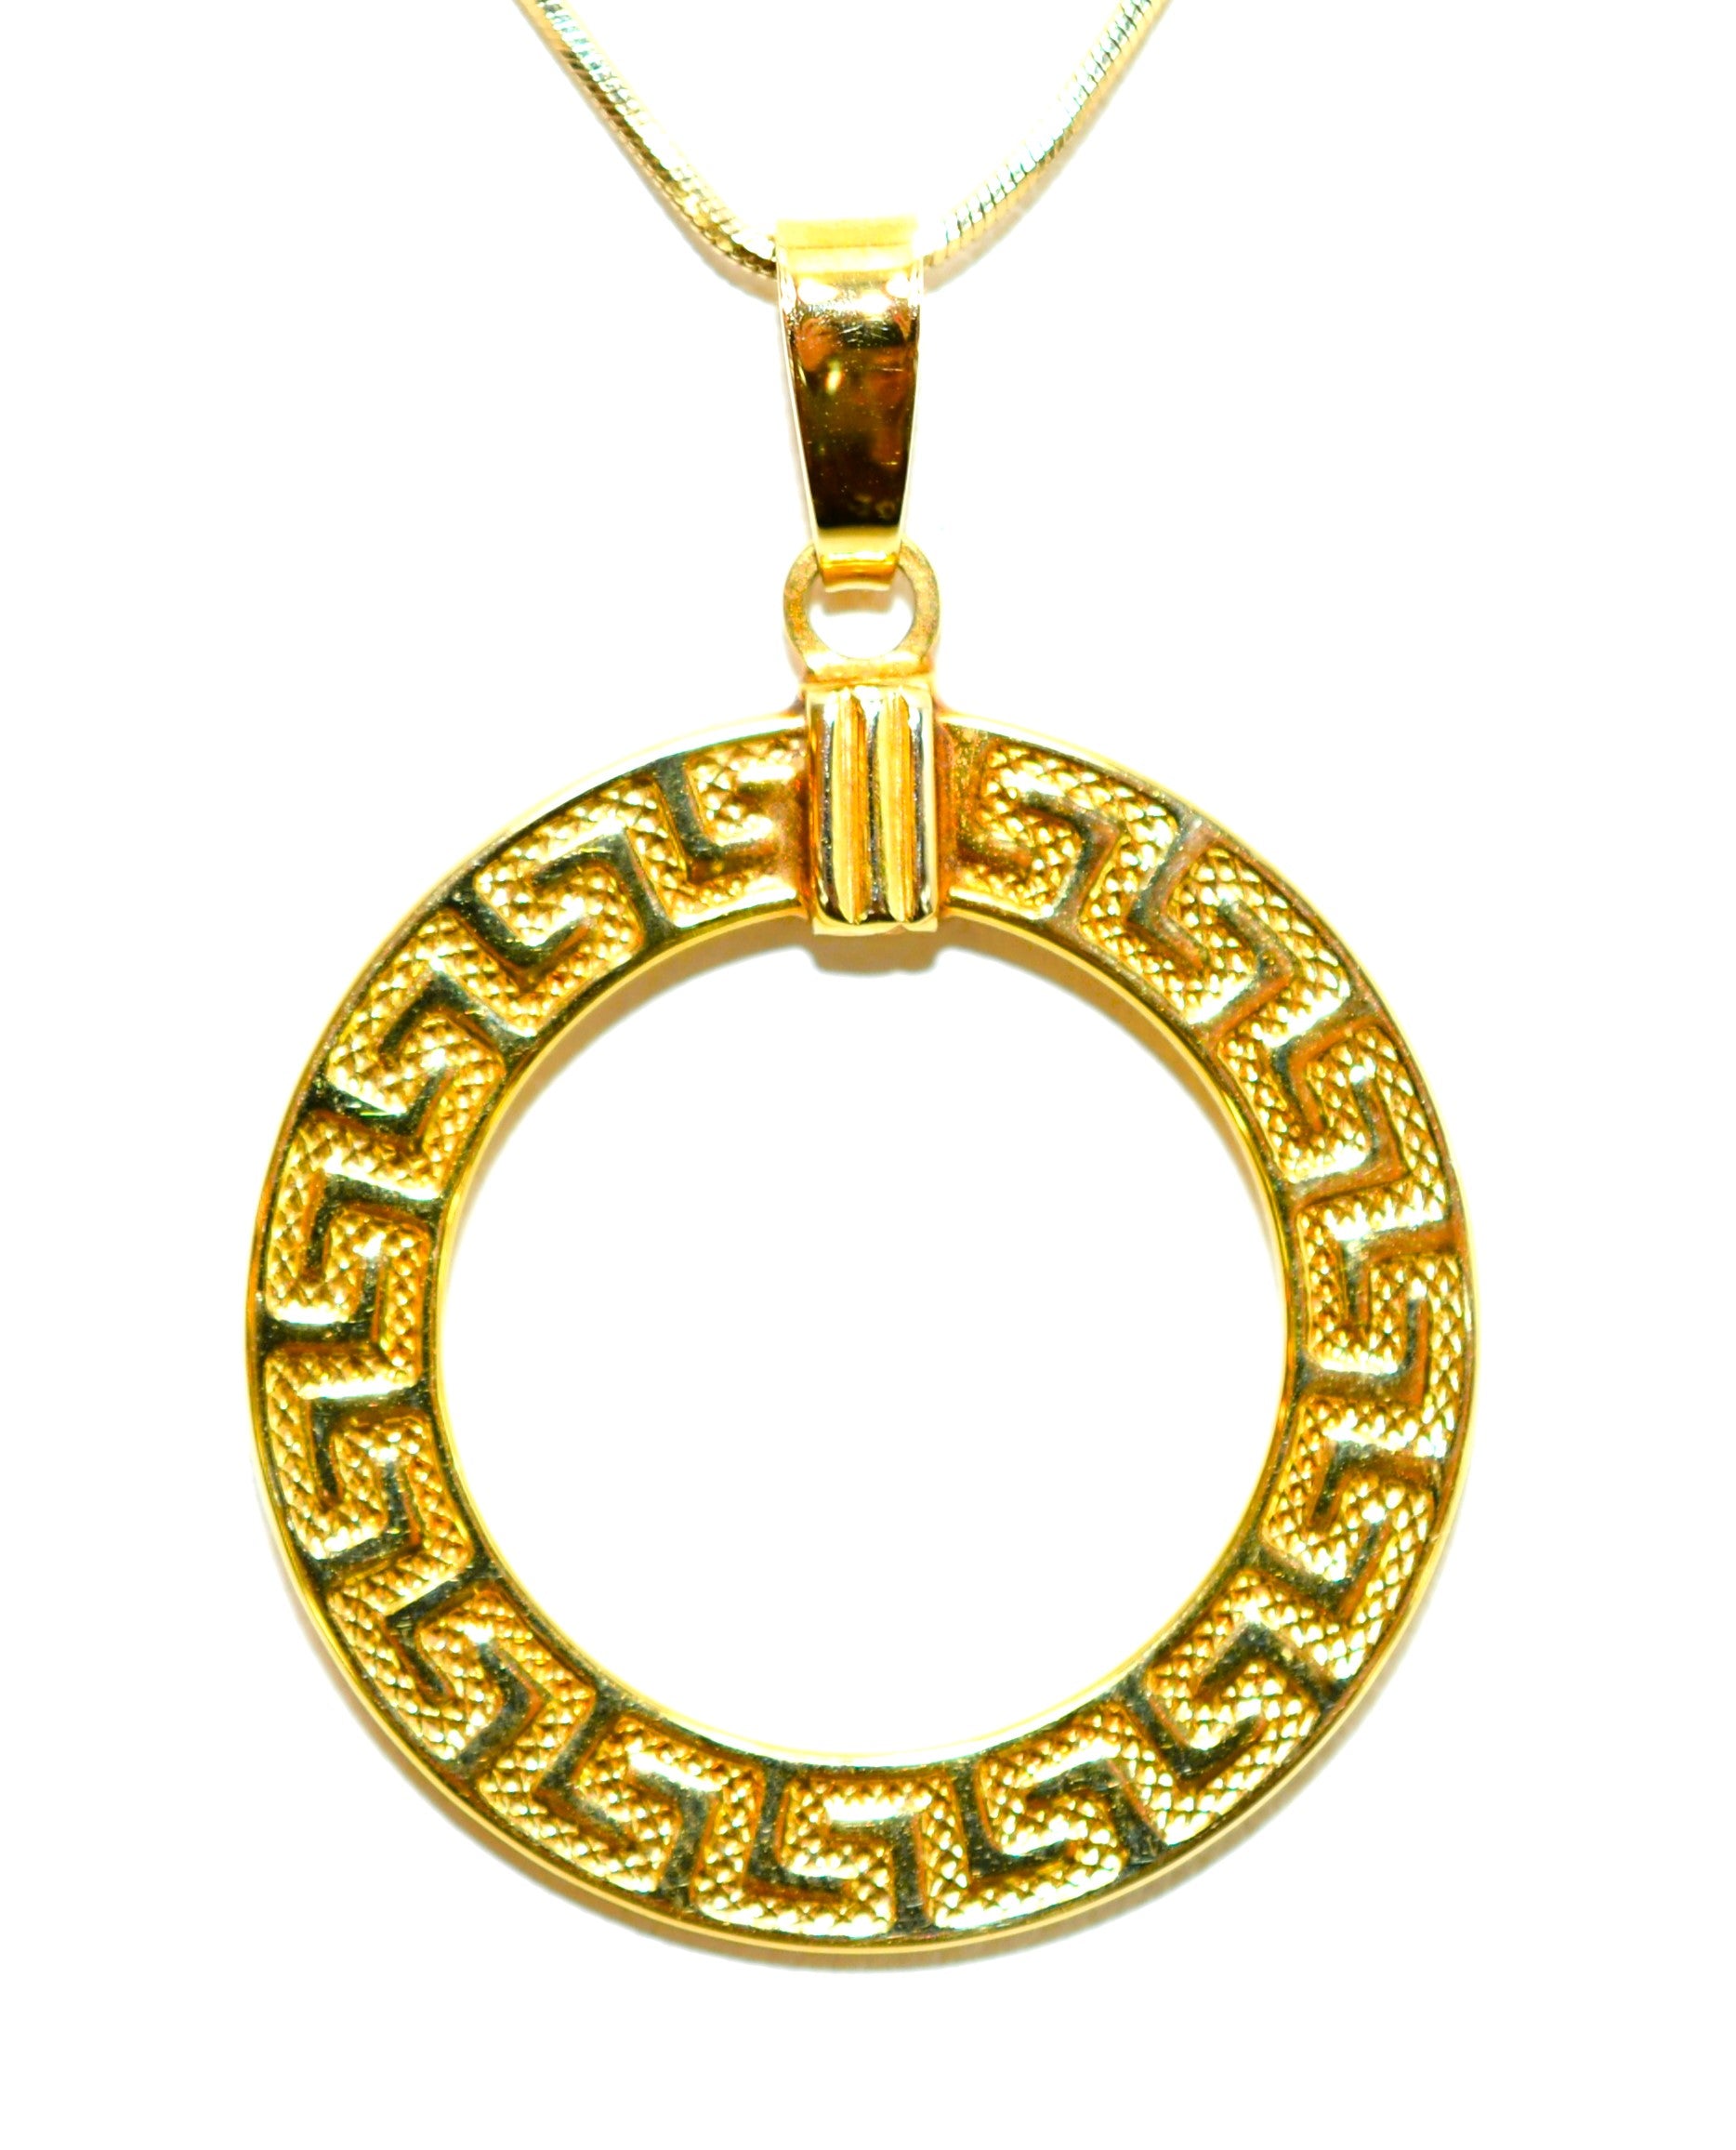 14K Solid Gold Pendant Necklace Circle Pendant No Stone Necklace Statement Jewellery Vintage Estate Jewelry Yellow Gold Pattern Snake Chain